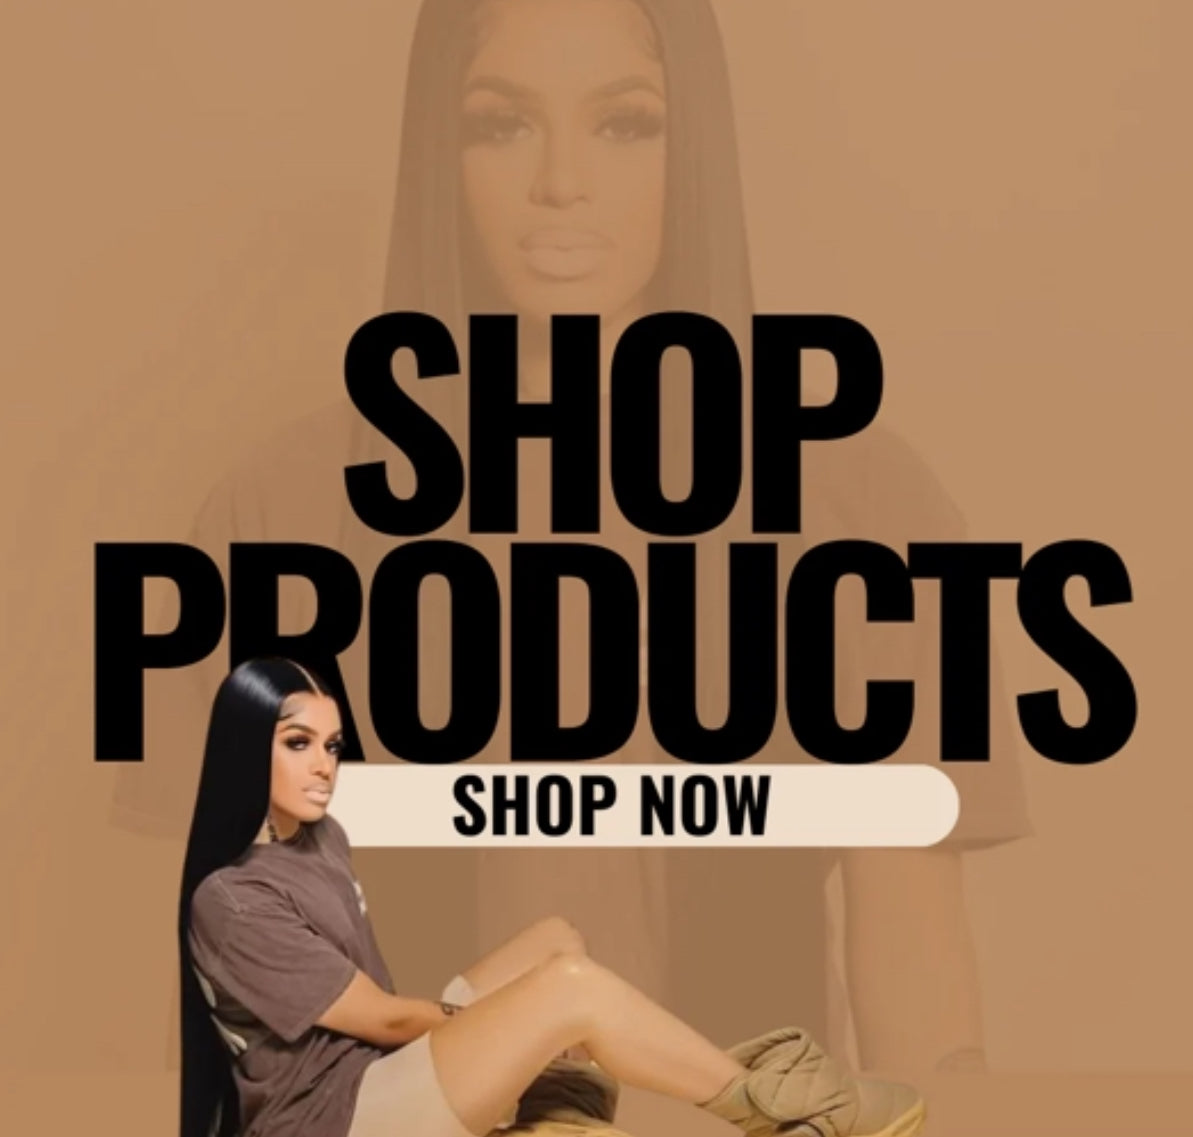 SHOP PRODUCTS